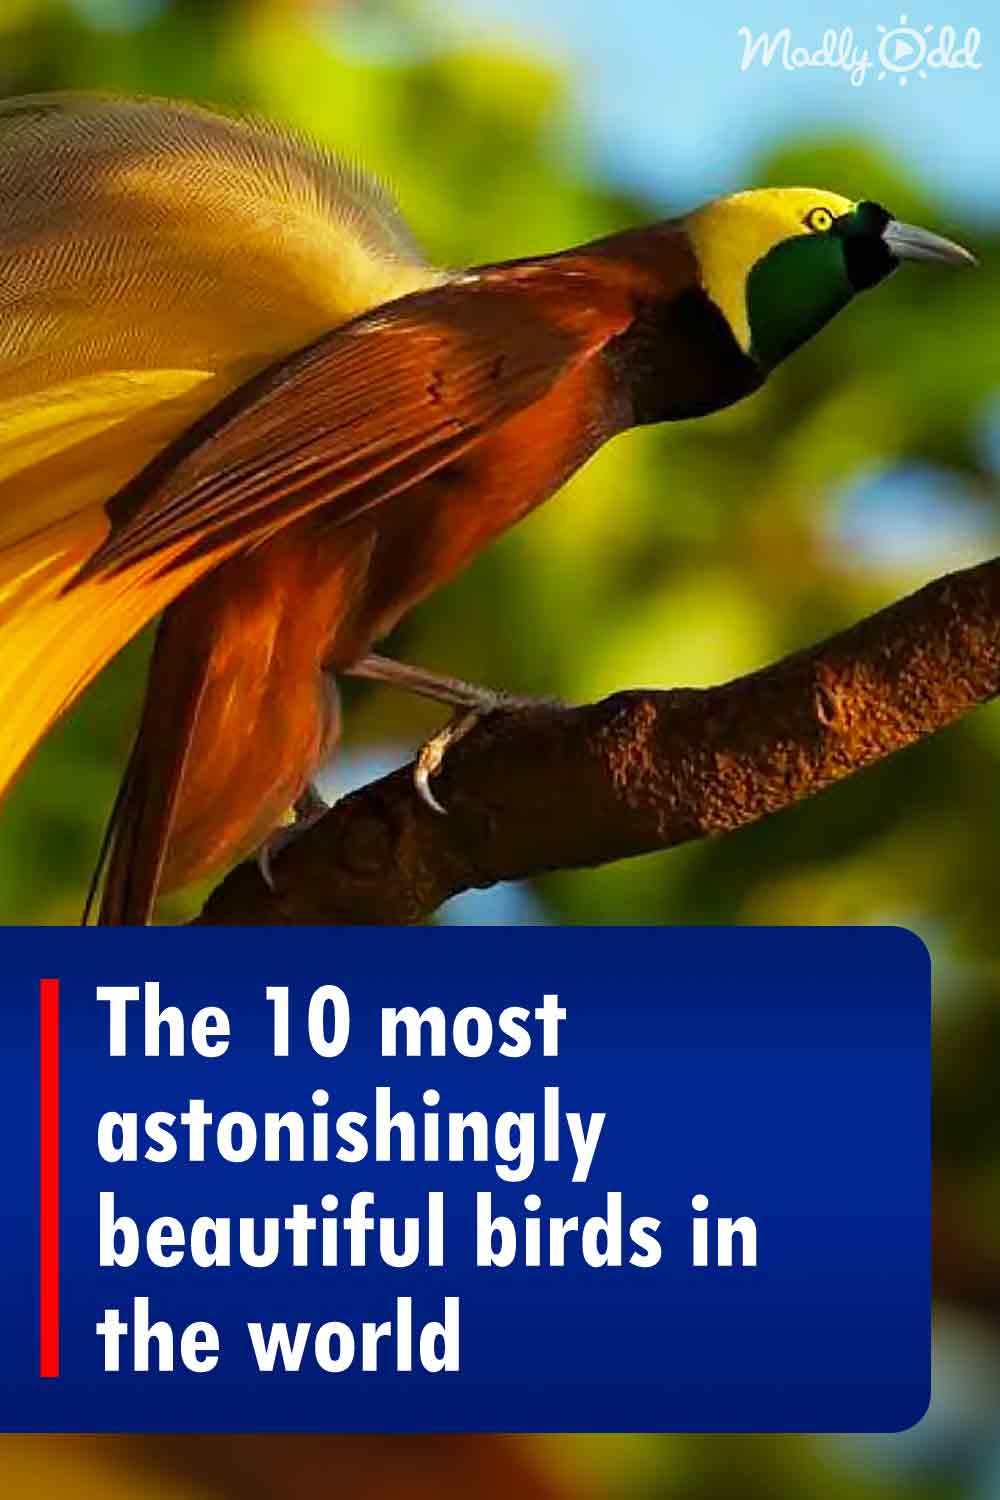 The 10 most astonishingly beautiful birds in the world